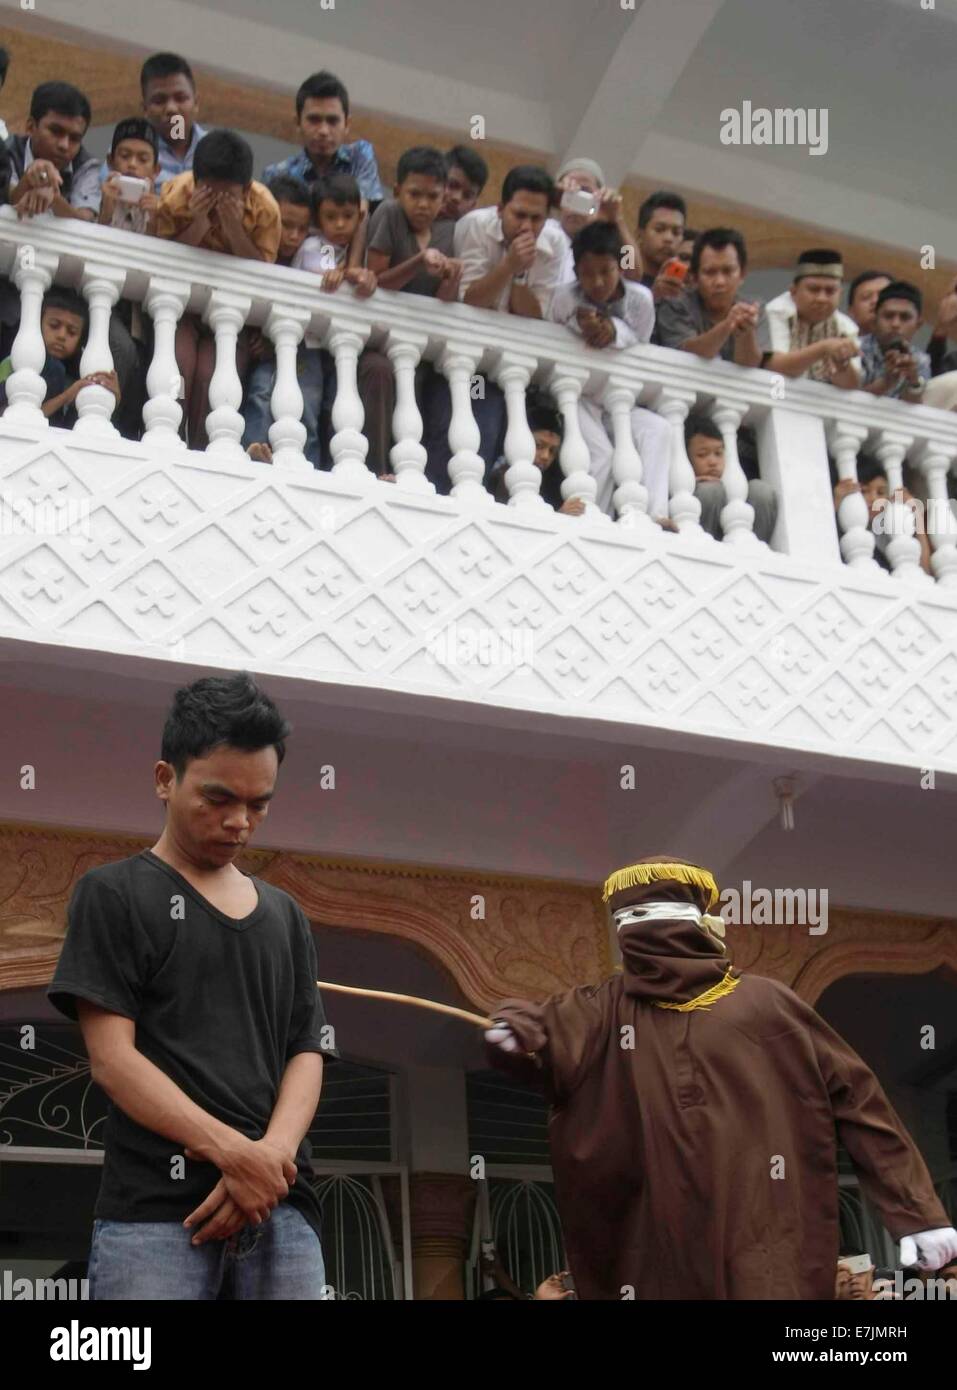 Aceh, Indonesia. 19th September, 2014. A Sharia law official whips a man convicted of gambling with a rattan cane during a public caning in Aceh, Indonesia, on Sept. 19, 2014. The provincial administration of Aceh, in the north of the Indonesian island of Sumatra, has approved a law called the 'Qanun Jinayat' implemented a version of Islamic Sharia law since 2001 Credit:  Xinhua/Alamy Live News Stock Photo